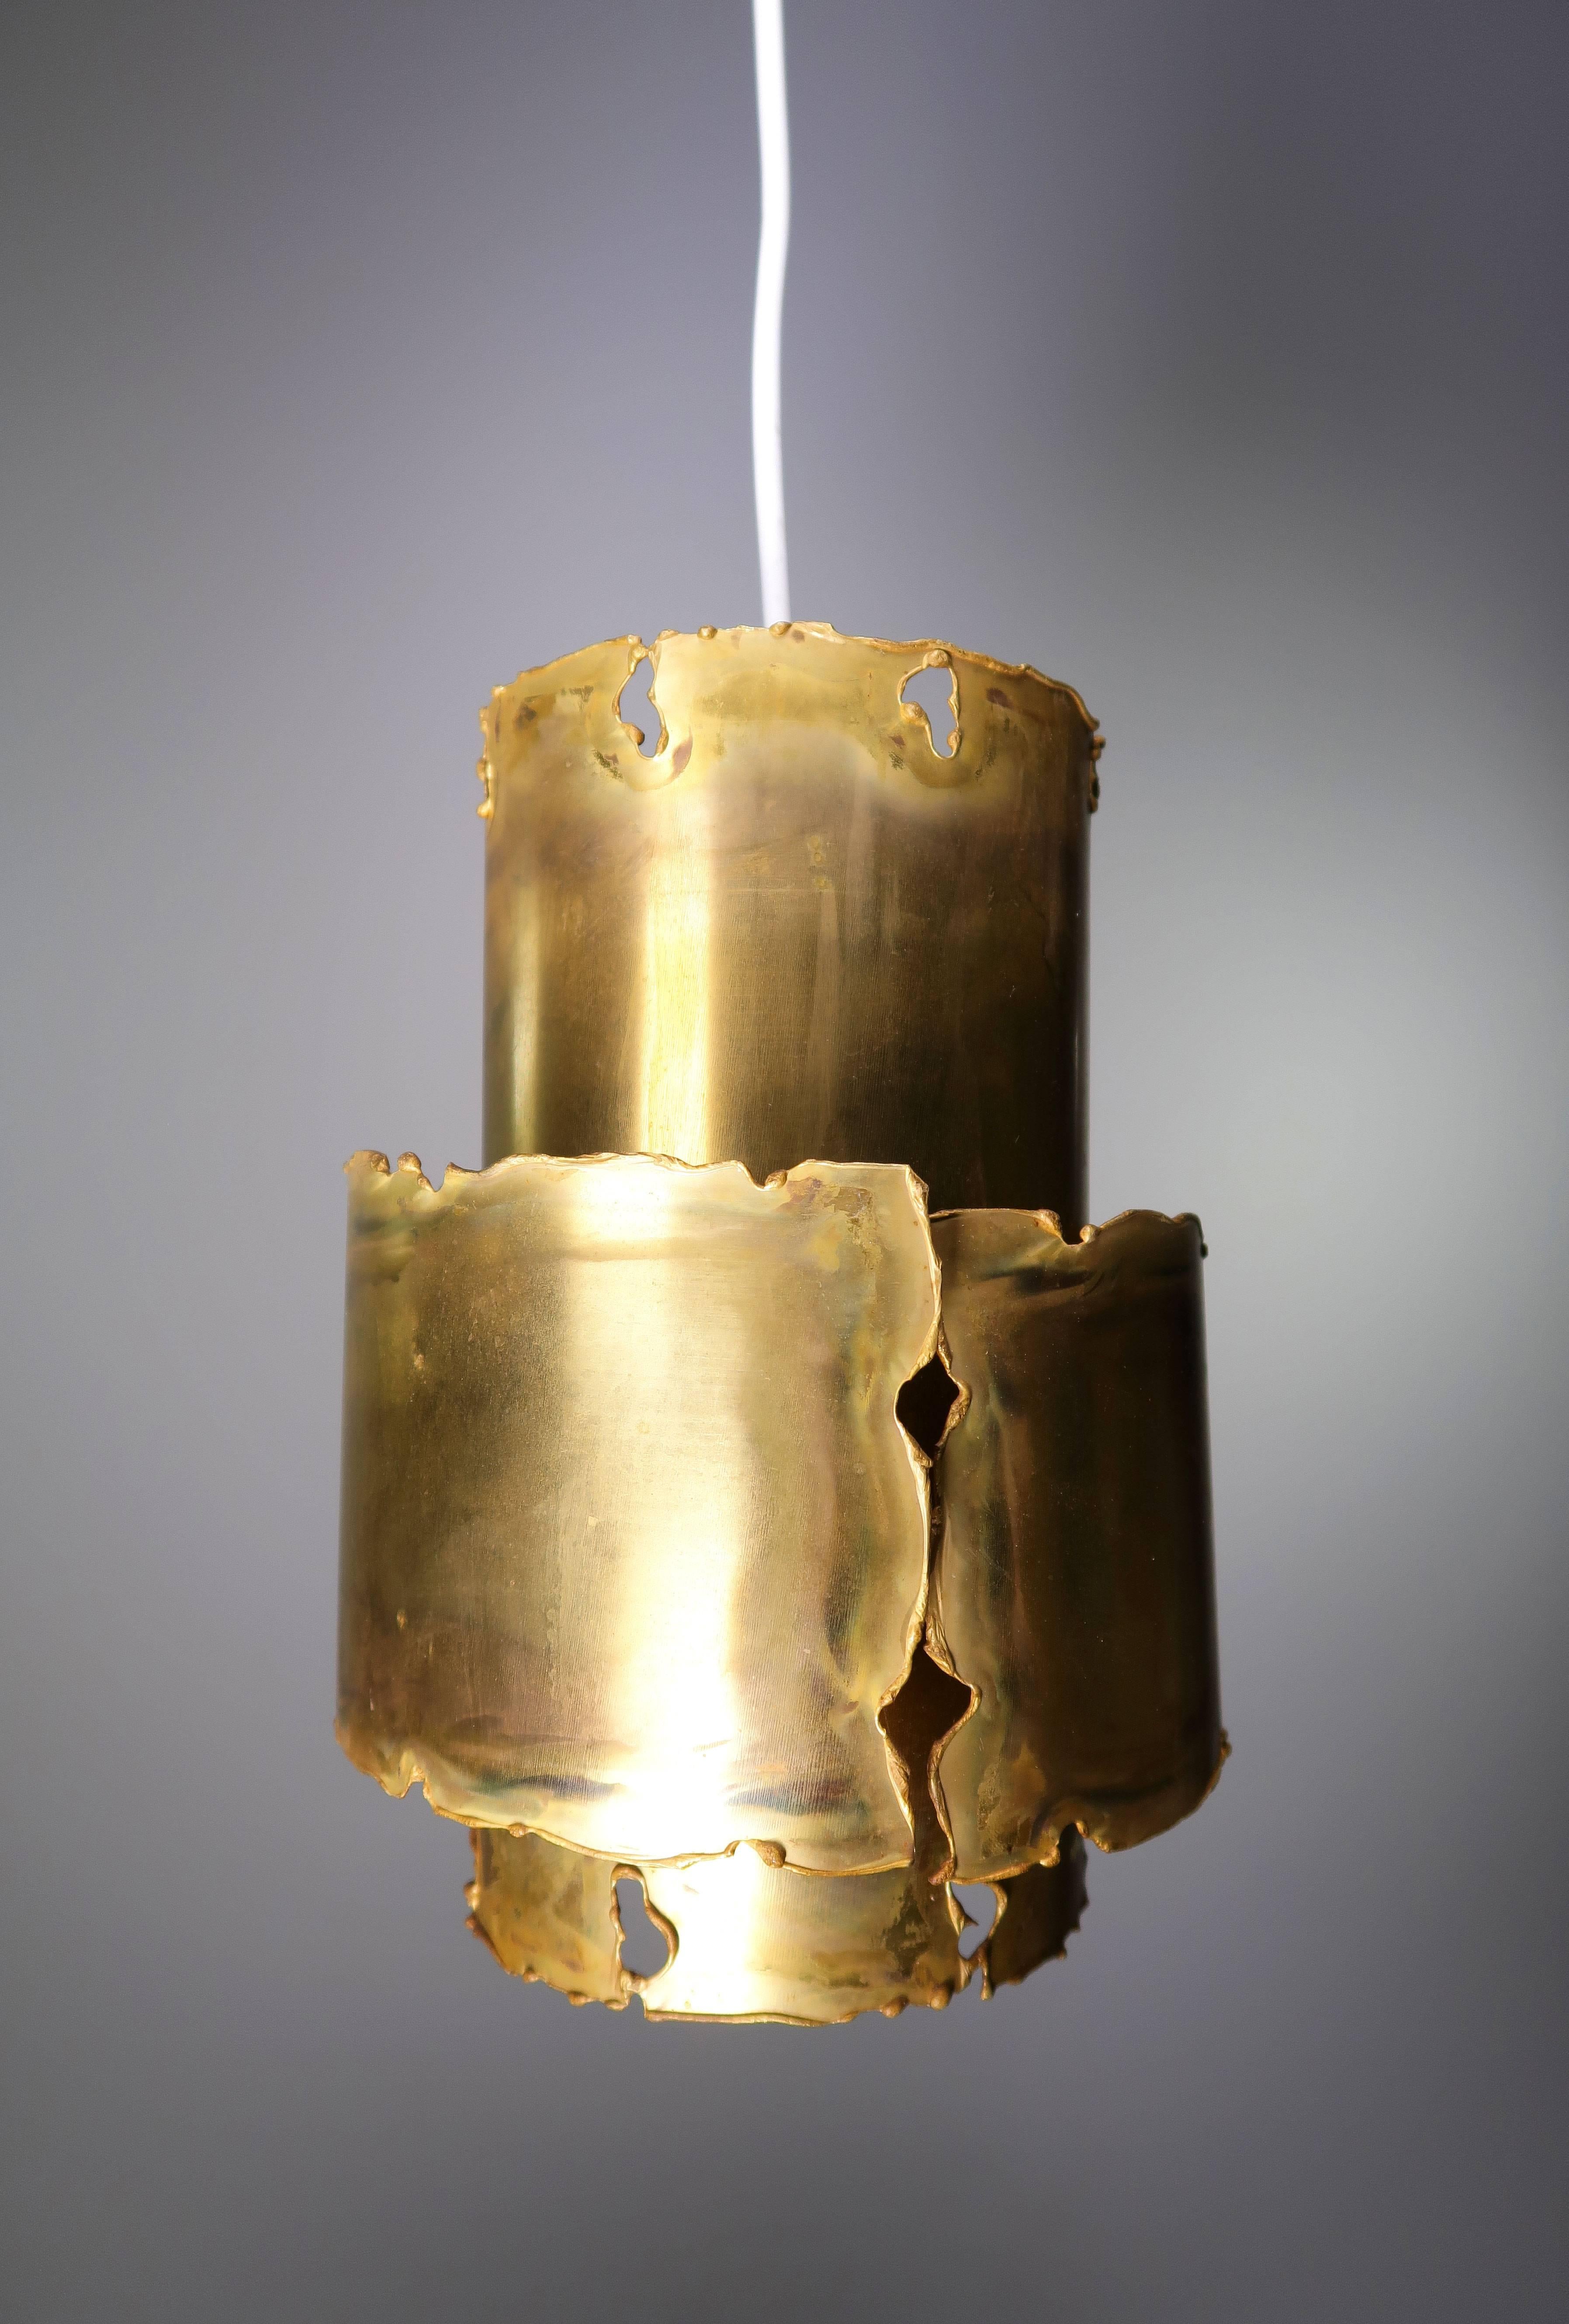 Classic and unique Holm Sorensen handmade Danish Brutalist Mid-Century Modern brass pendant showing the designer's signature metal treatment method: Flame cut edges and acid treated surfaces to bring out the nuances in the metal and make it come to